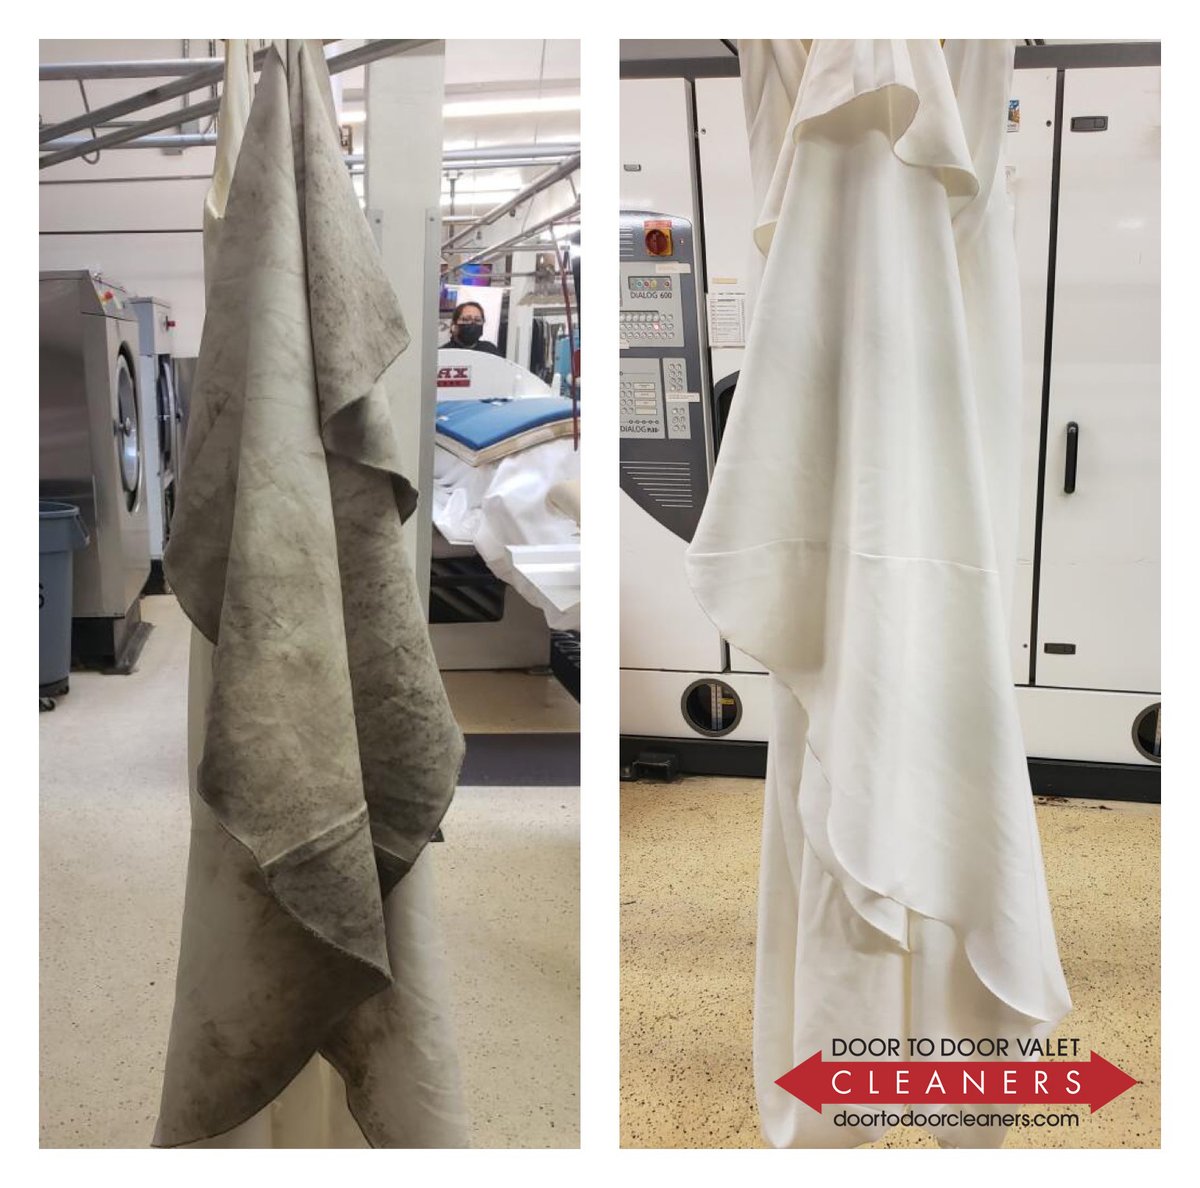 No matter how you choose to celebrate in your #weddinggown, we have the expertise to fully restore it to its original beauty. Take the hemline of this dress, for instance! 😉

#beforeandafter #bridaldress #bridalgown #weddingdress #weddingdresscleaning #weddingdressrestoration